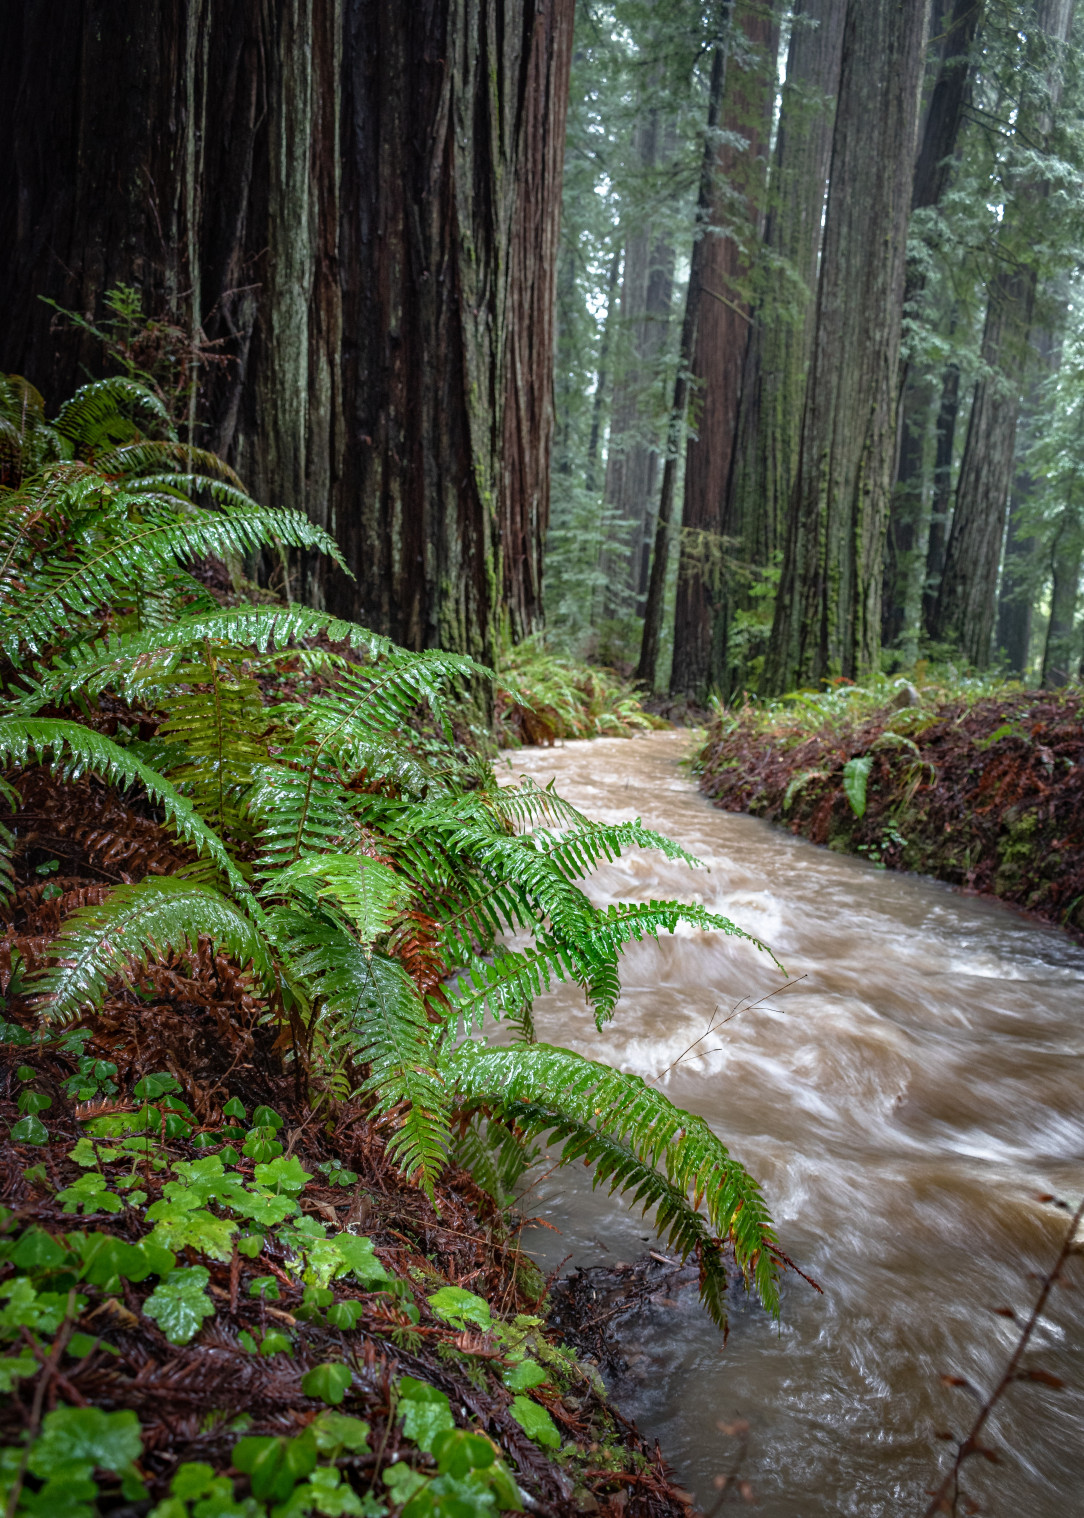 The Redwood Forest in Humboldt County, California is looking nice and quenched from the atmospheric river